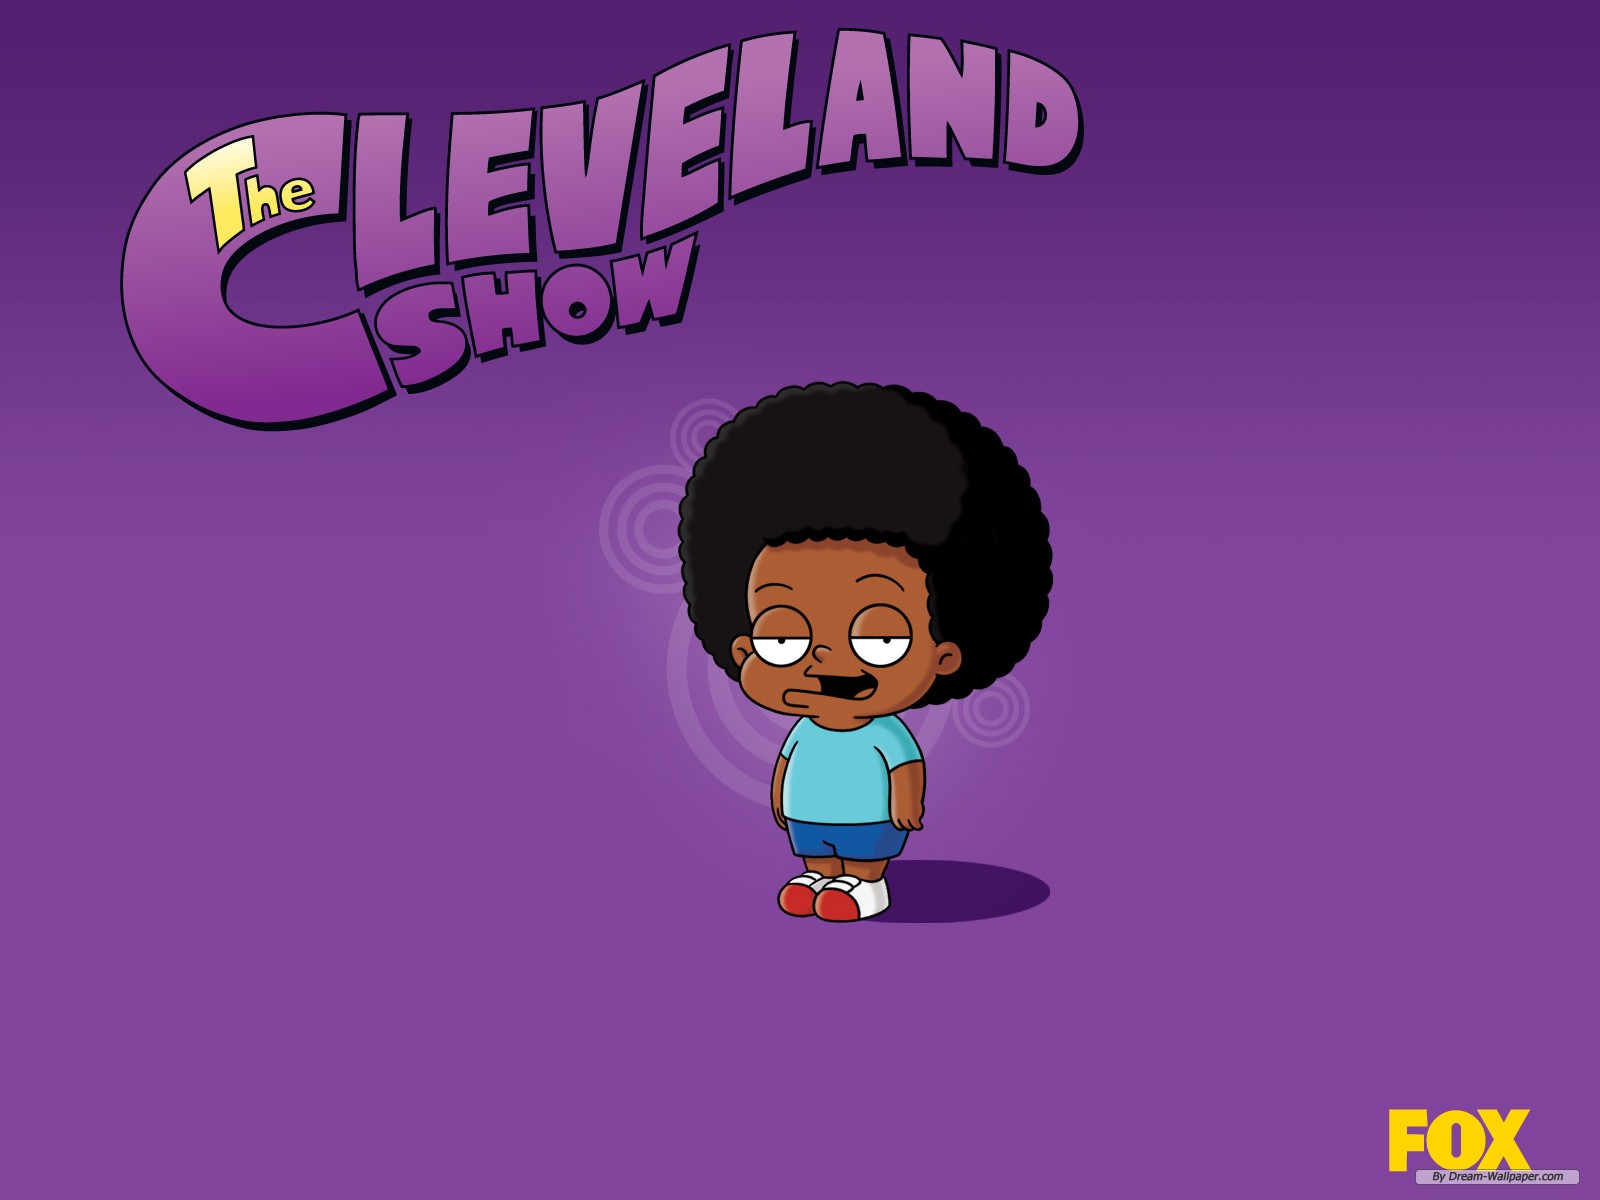 Wallpaper The Cleveland Show Index